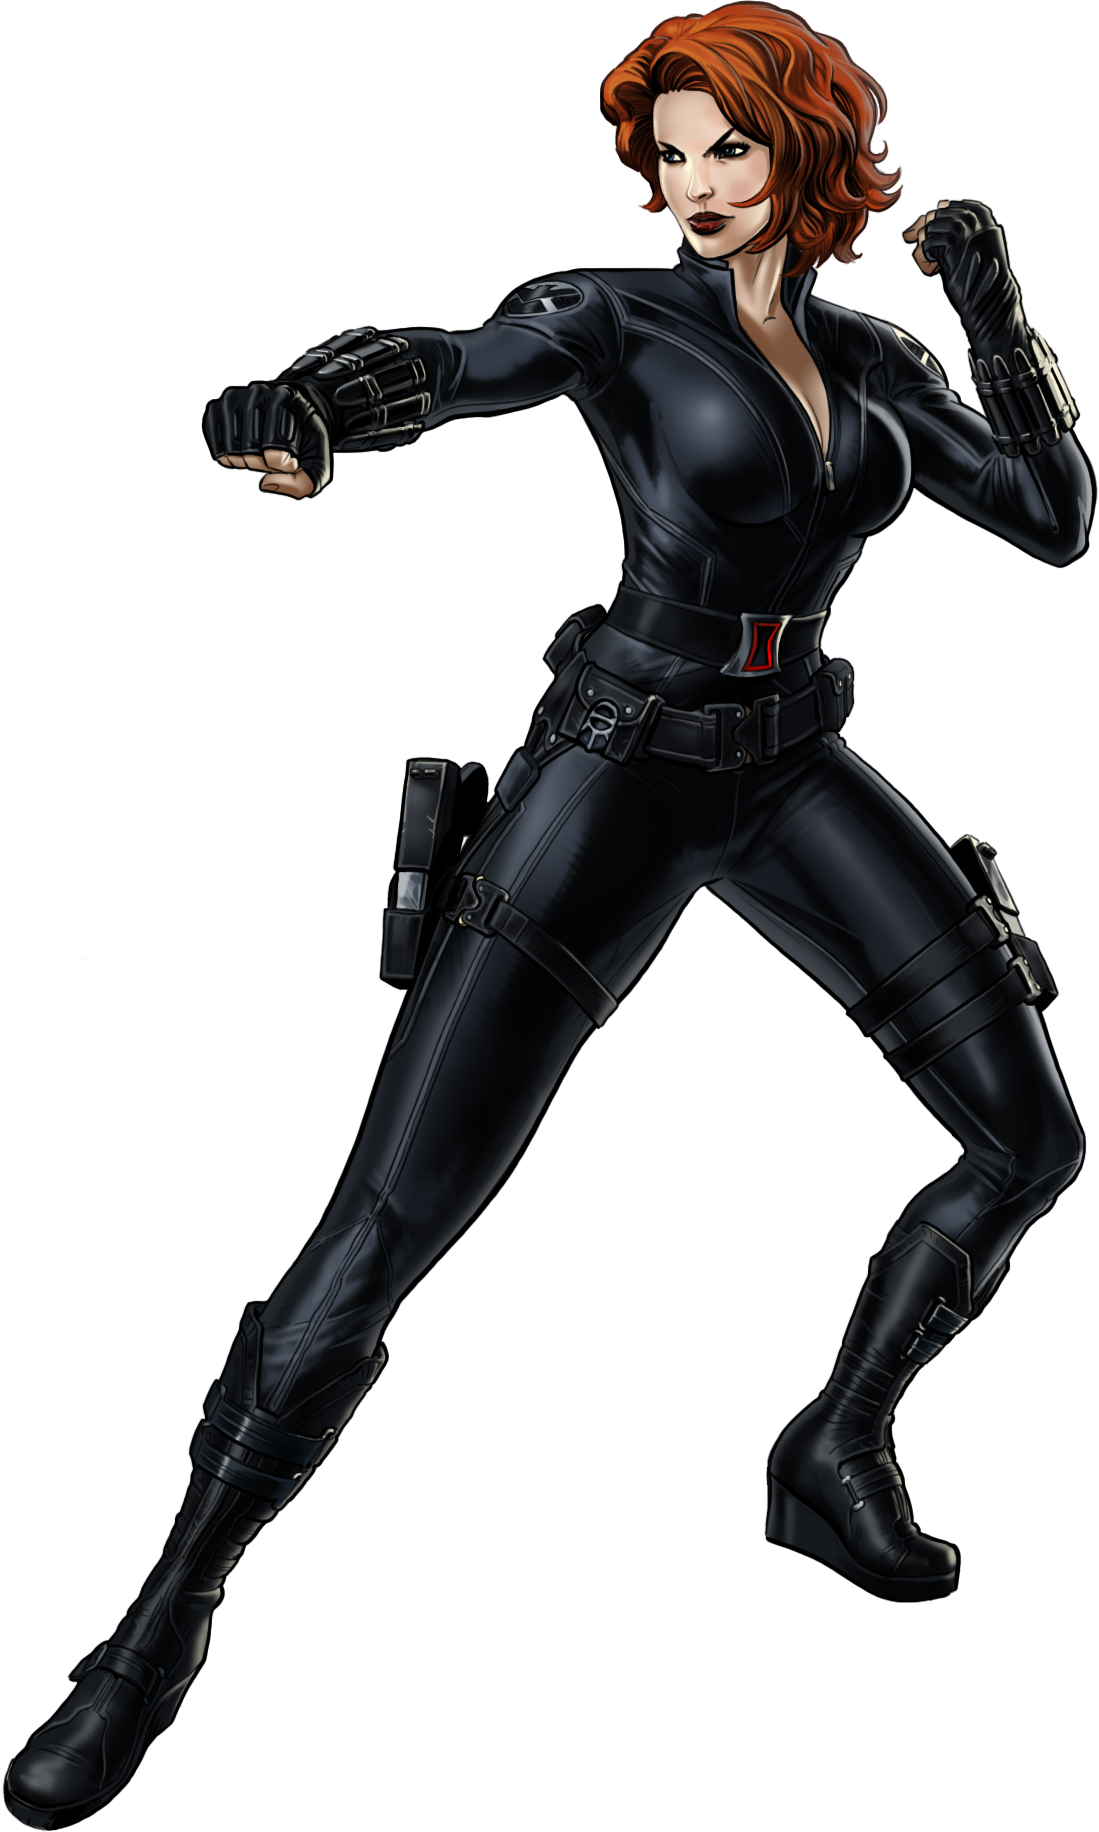 1000+ images about Black Widow